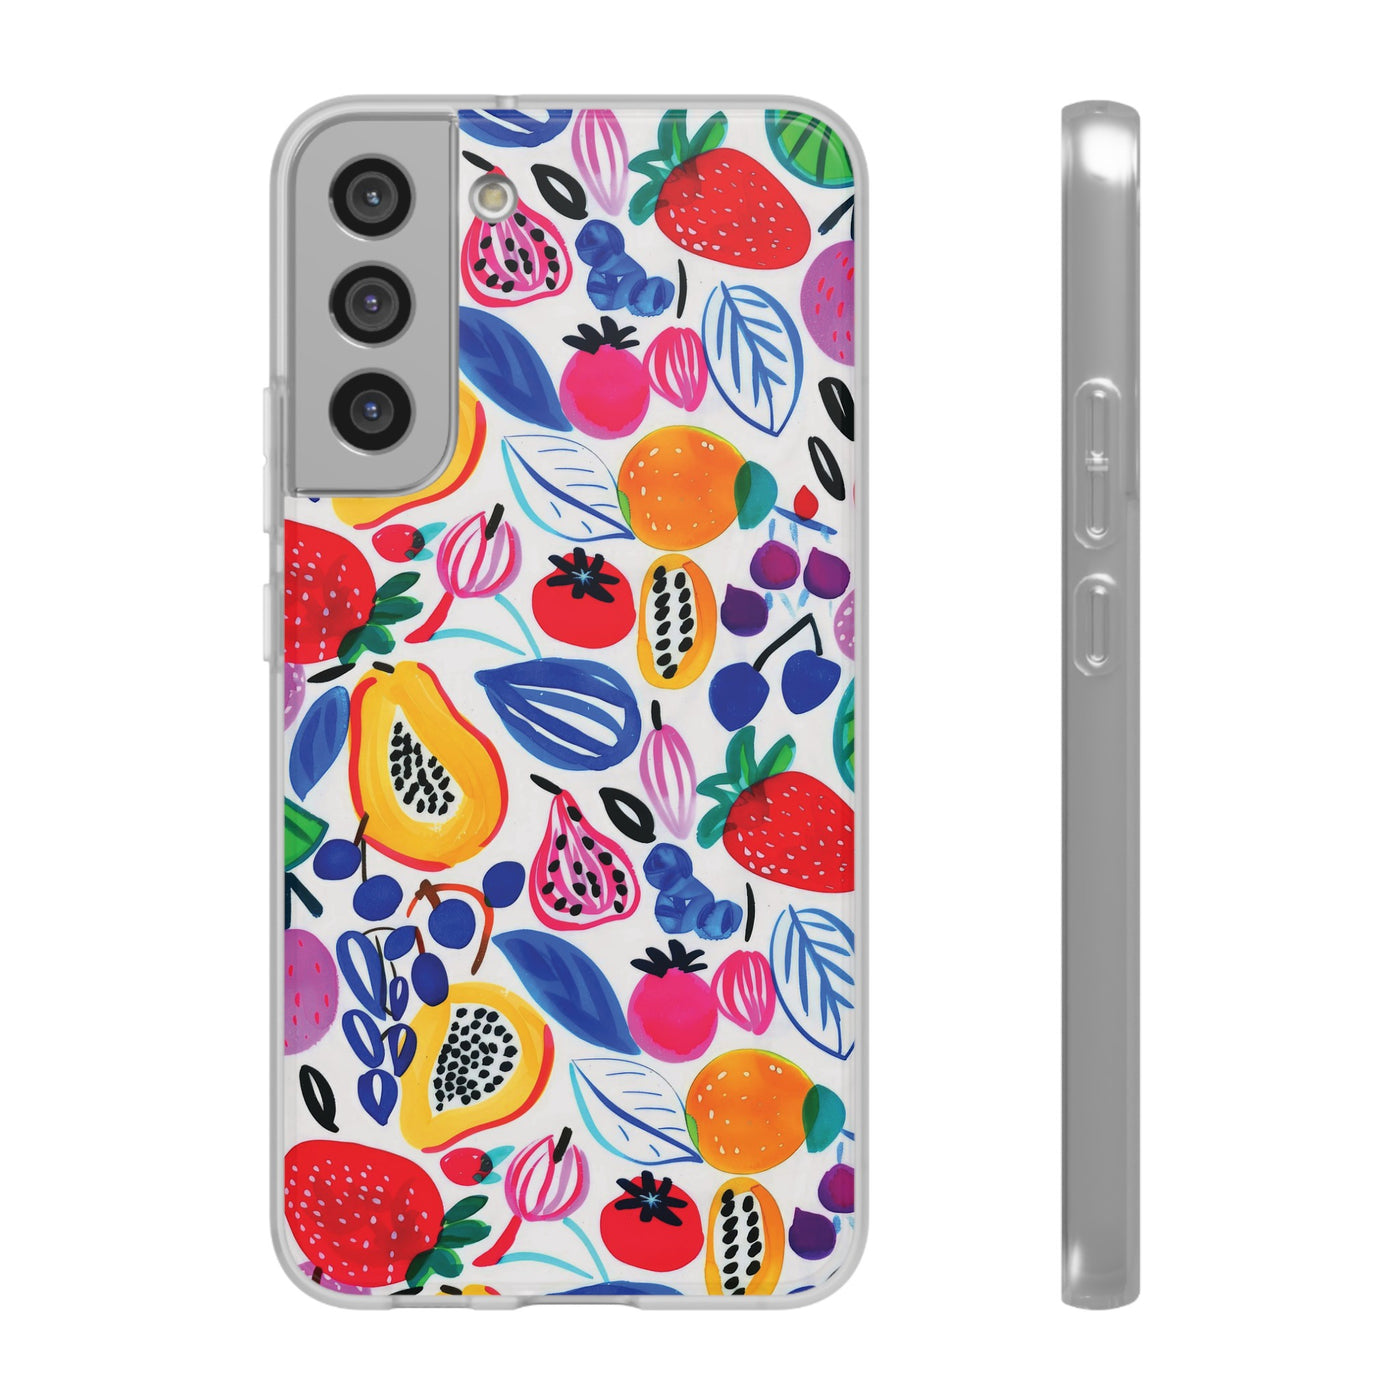 Cute Flexi Phone Cases, For Samsung Galaxy + Iphone, Summer Fruit Cocktail, Galaxy S23 Phone Case, Samsung S22 Case, Samsung S21, Iphone 15, Iphone 14, Iphone 13